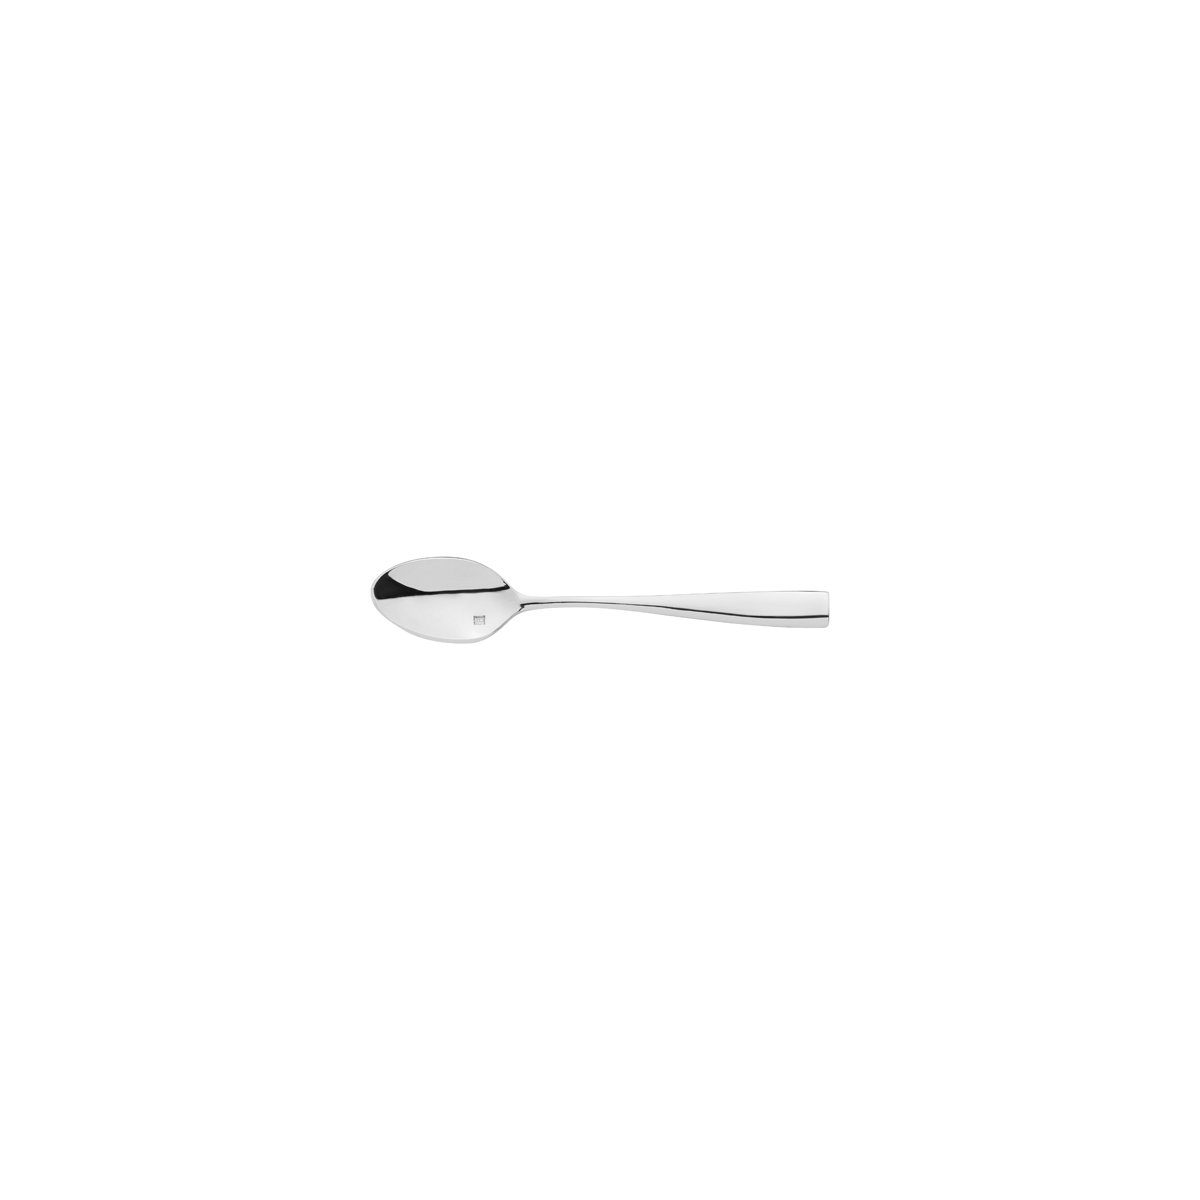 Coffee Spoon - Lucca from Fortessa. made out of Stainless Steel and sold in boxes of 12. Hospitality quality at wholesale price with The Flying Fork! 